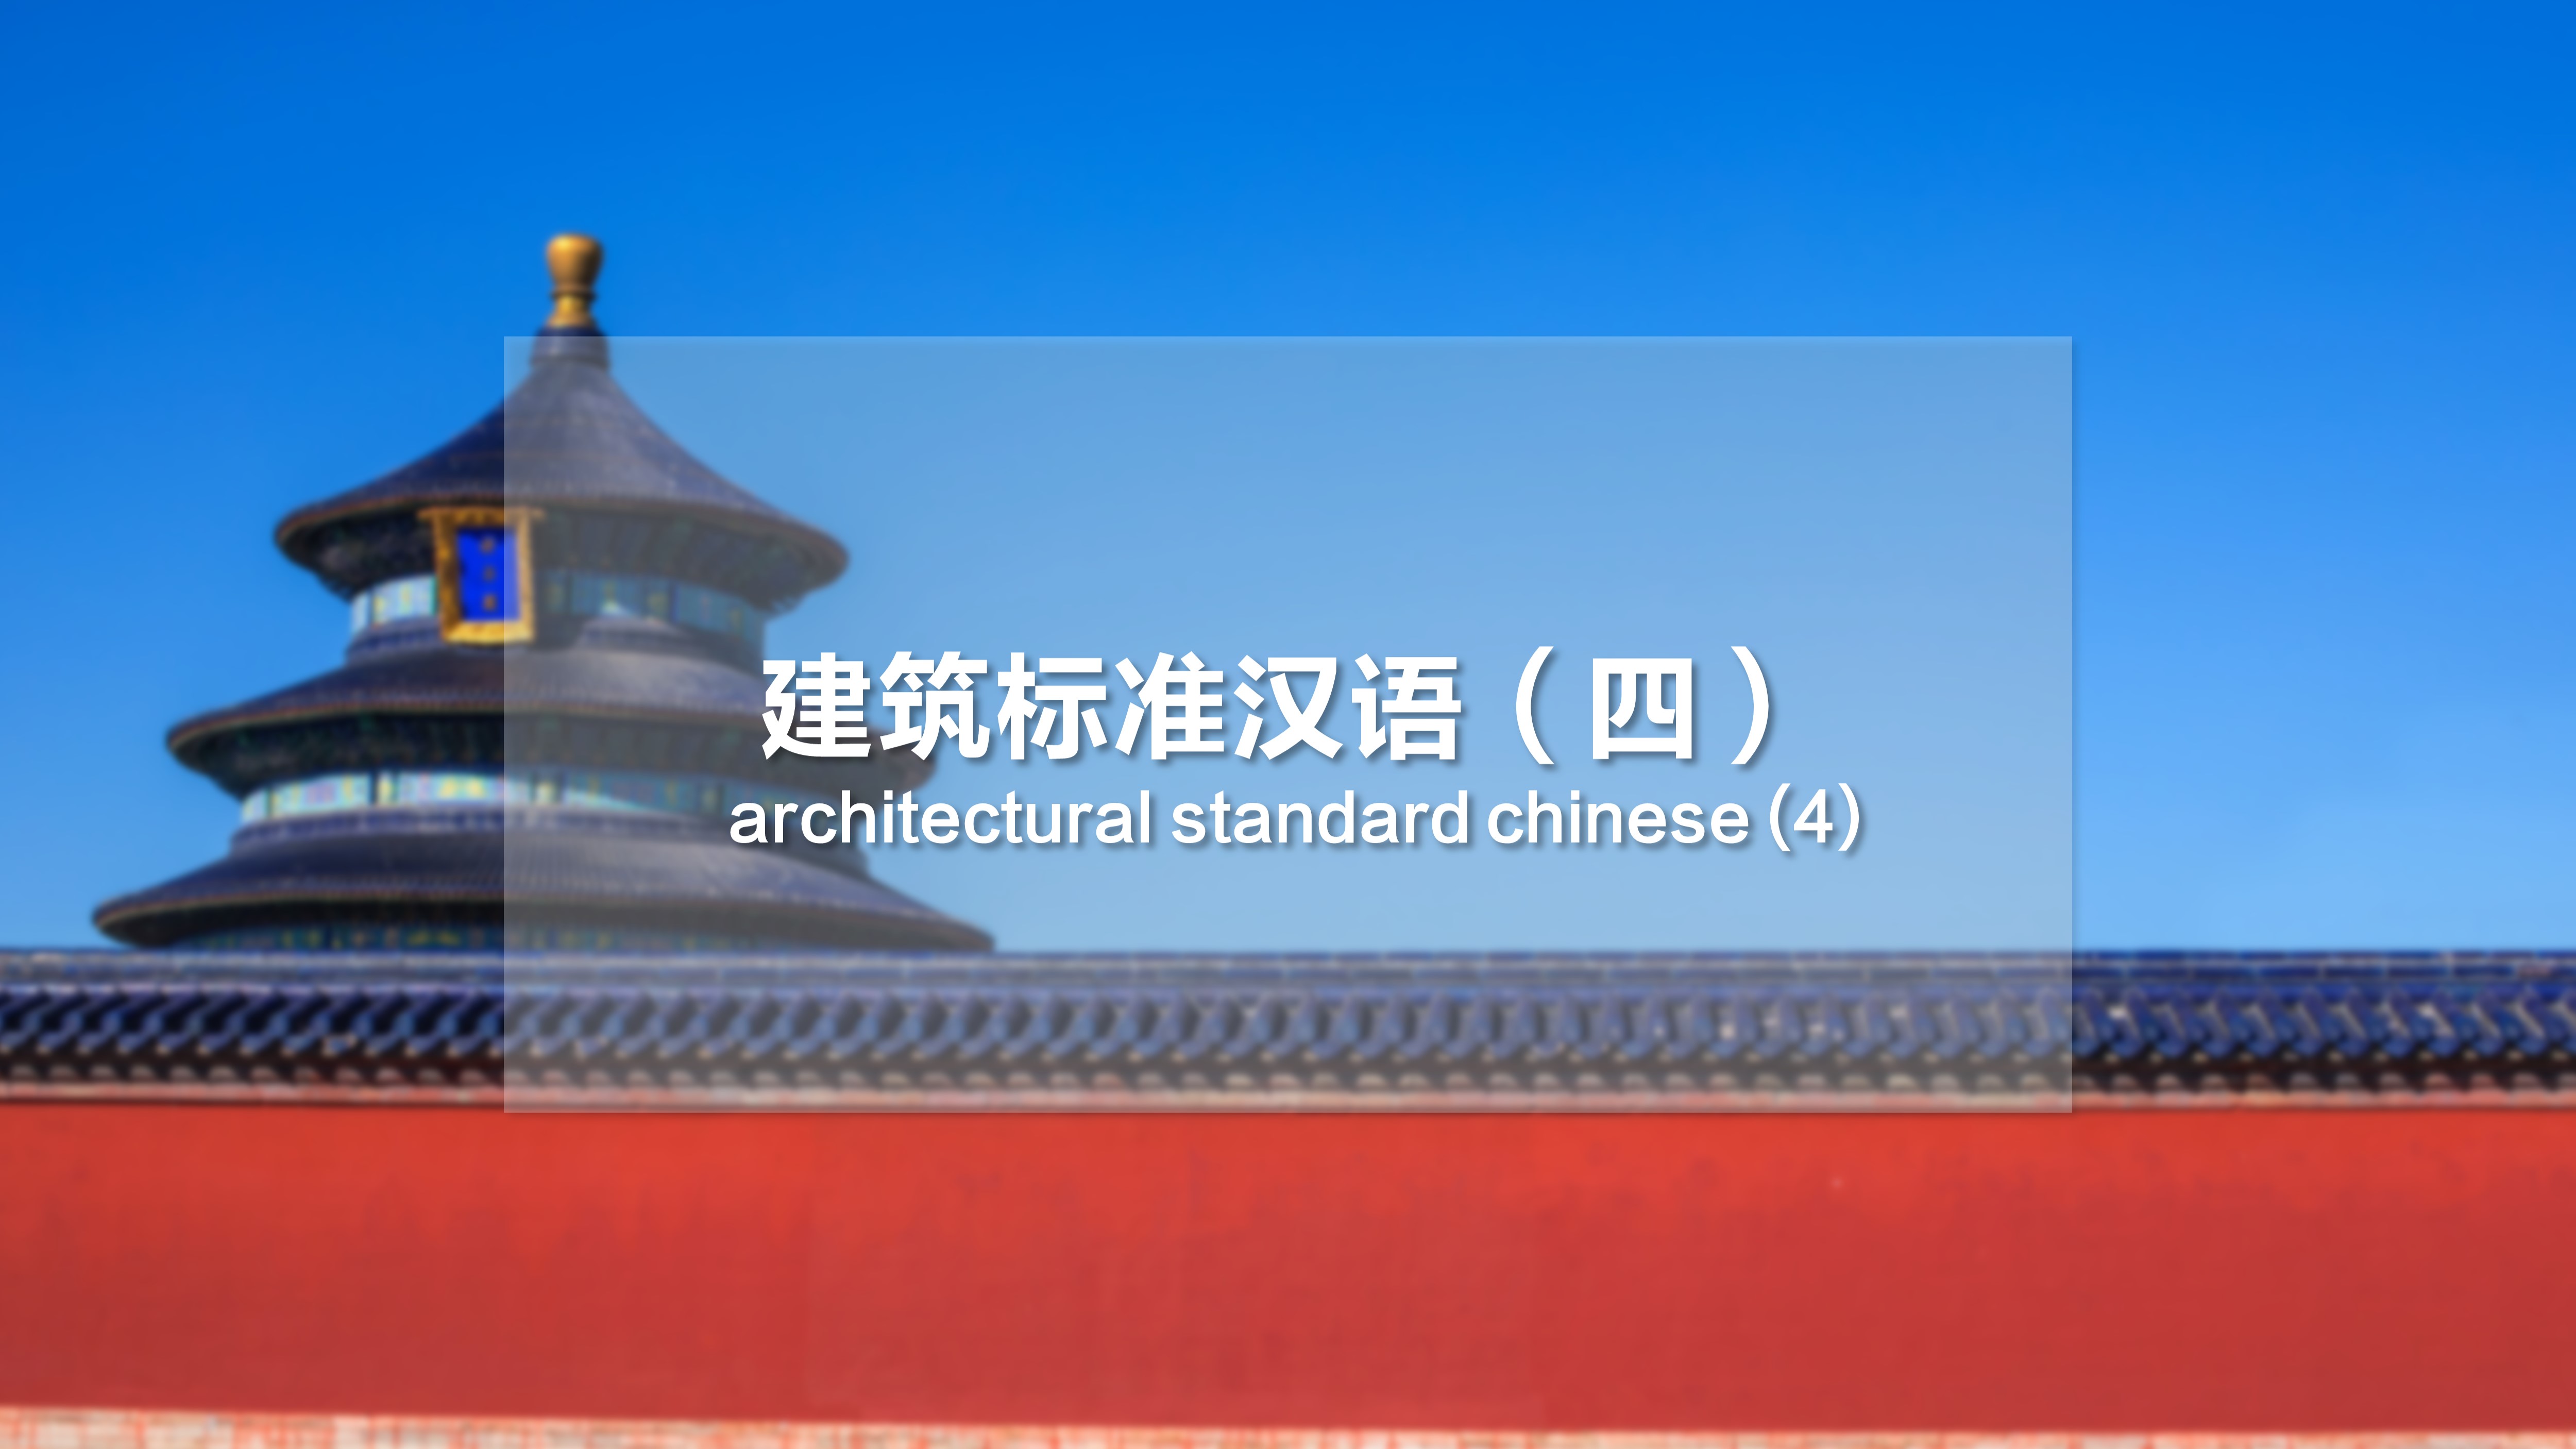 Architectural Standard Chinese (4)